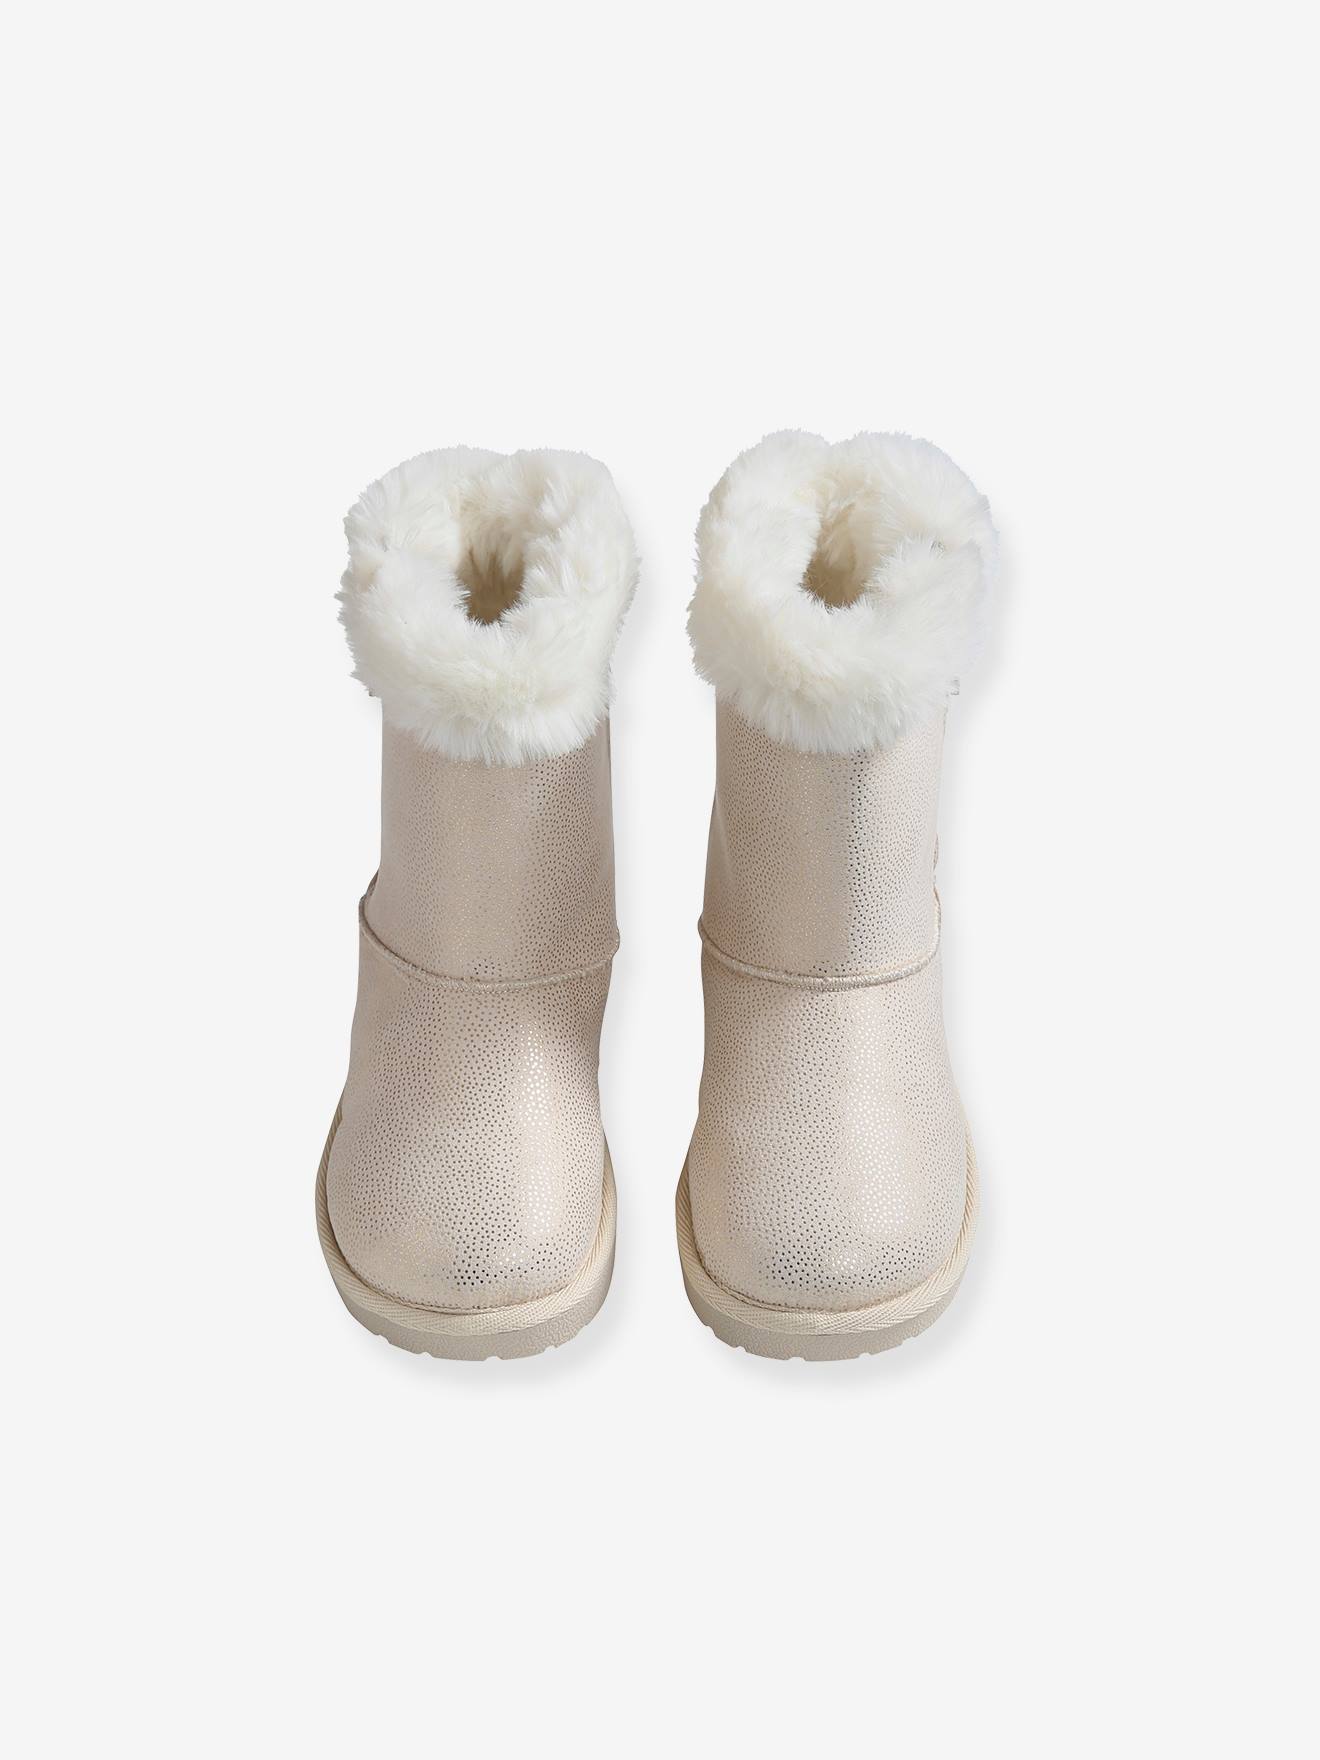 Girls' Boots with Fur - beige light 